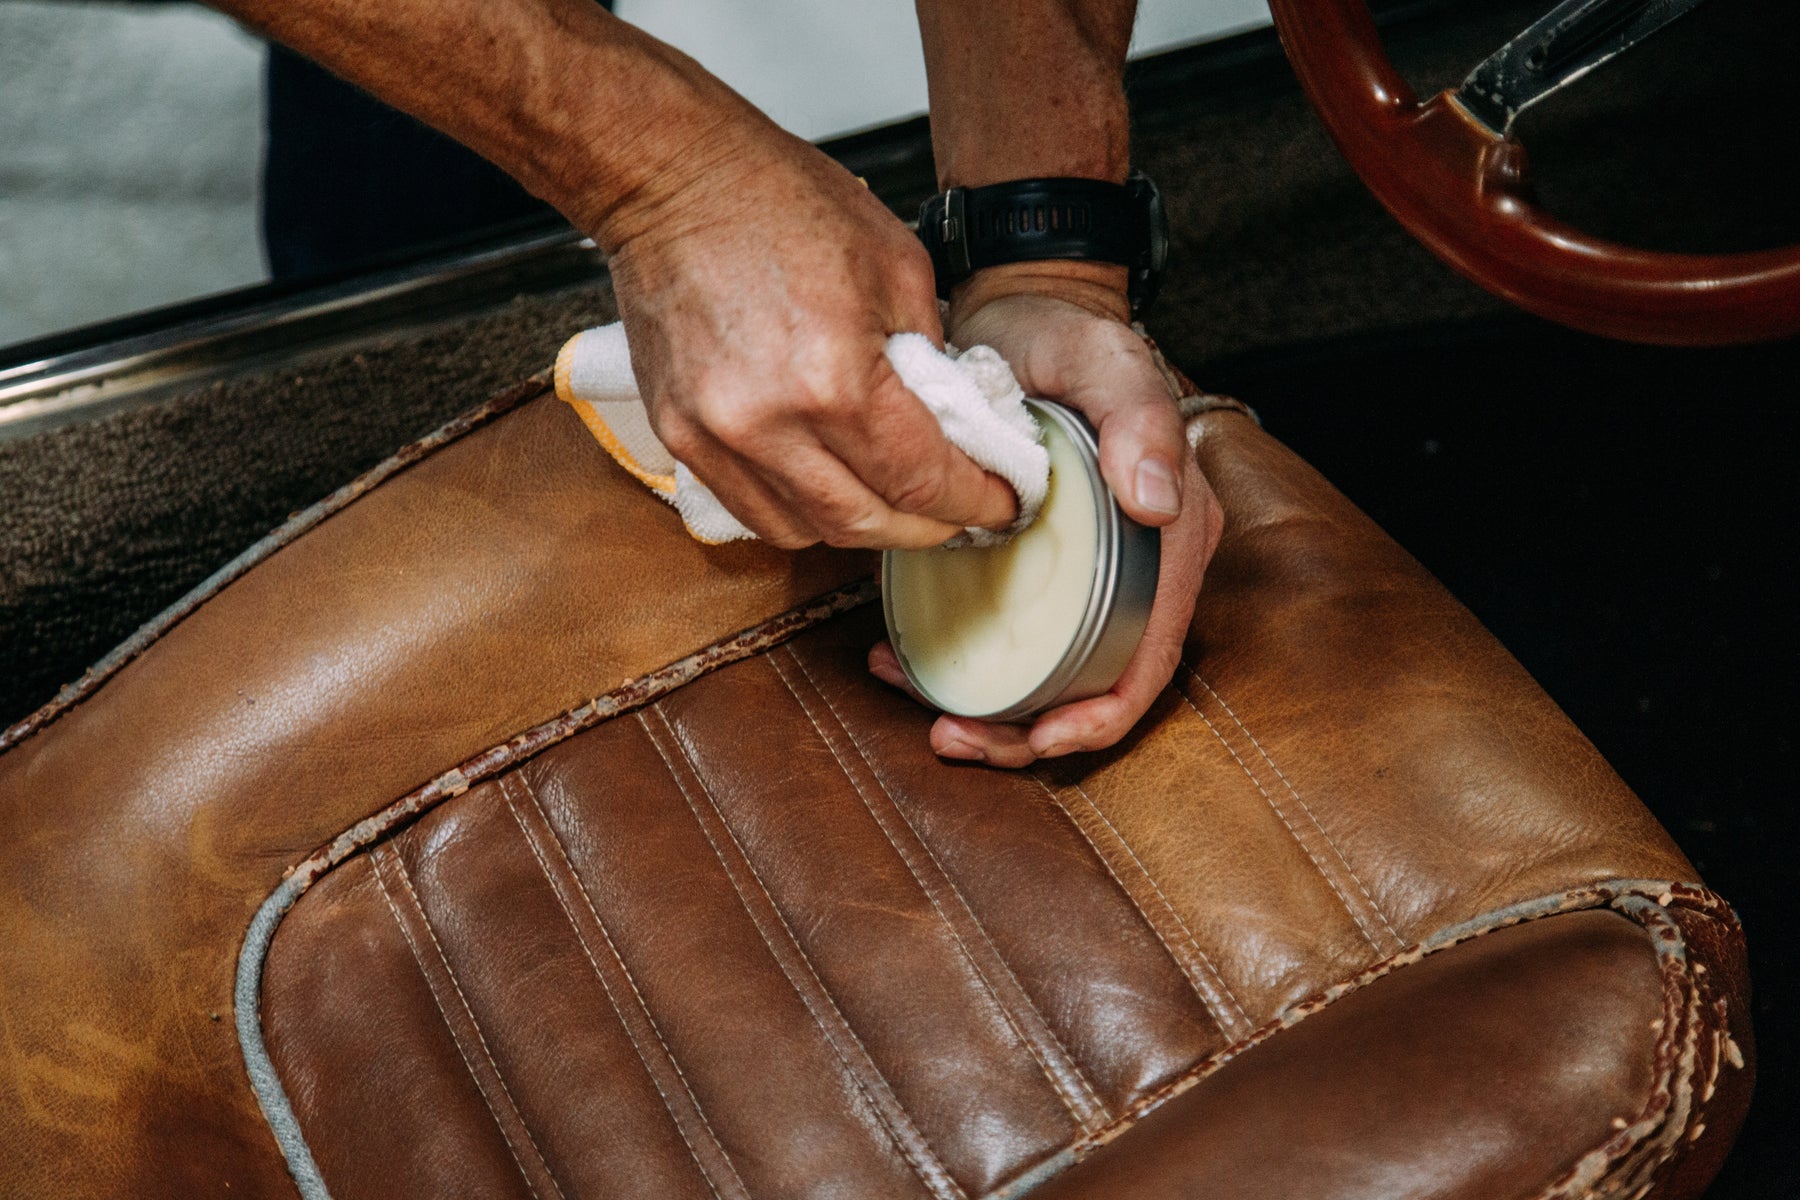 A man's hand holding a cloth, poised over an open can of 'Leather Love' leather conditioner, ready to rejuvenate faded leather seats